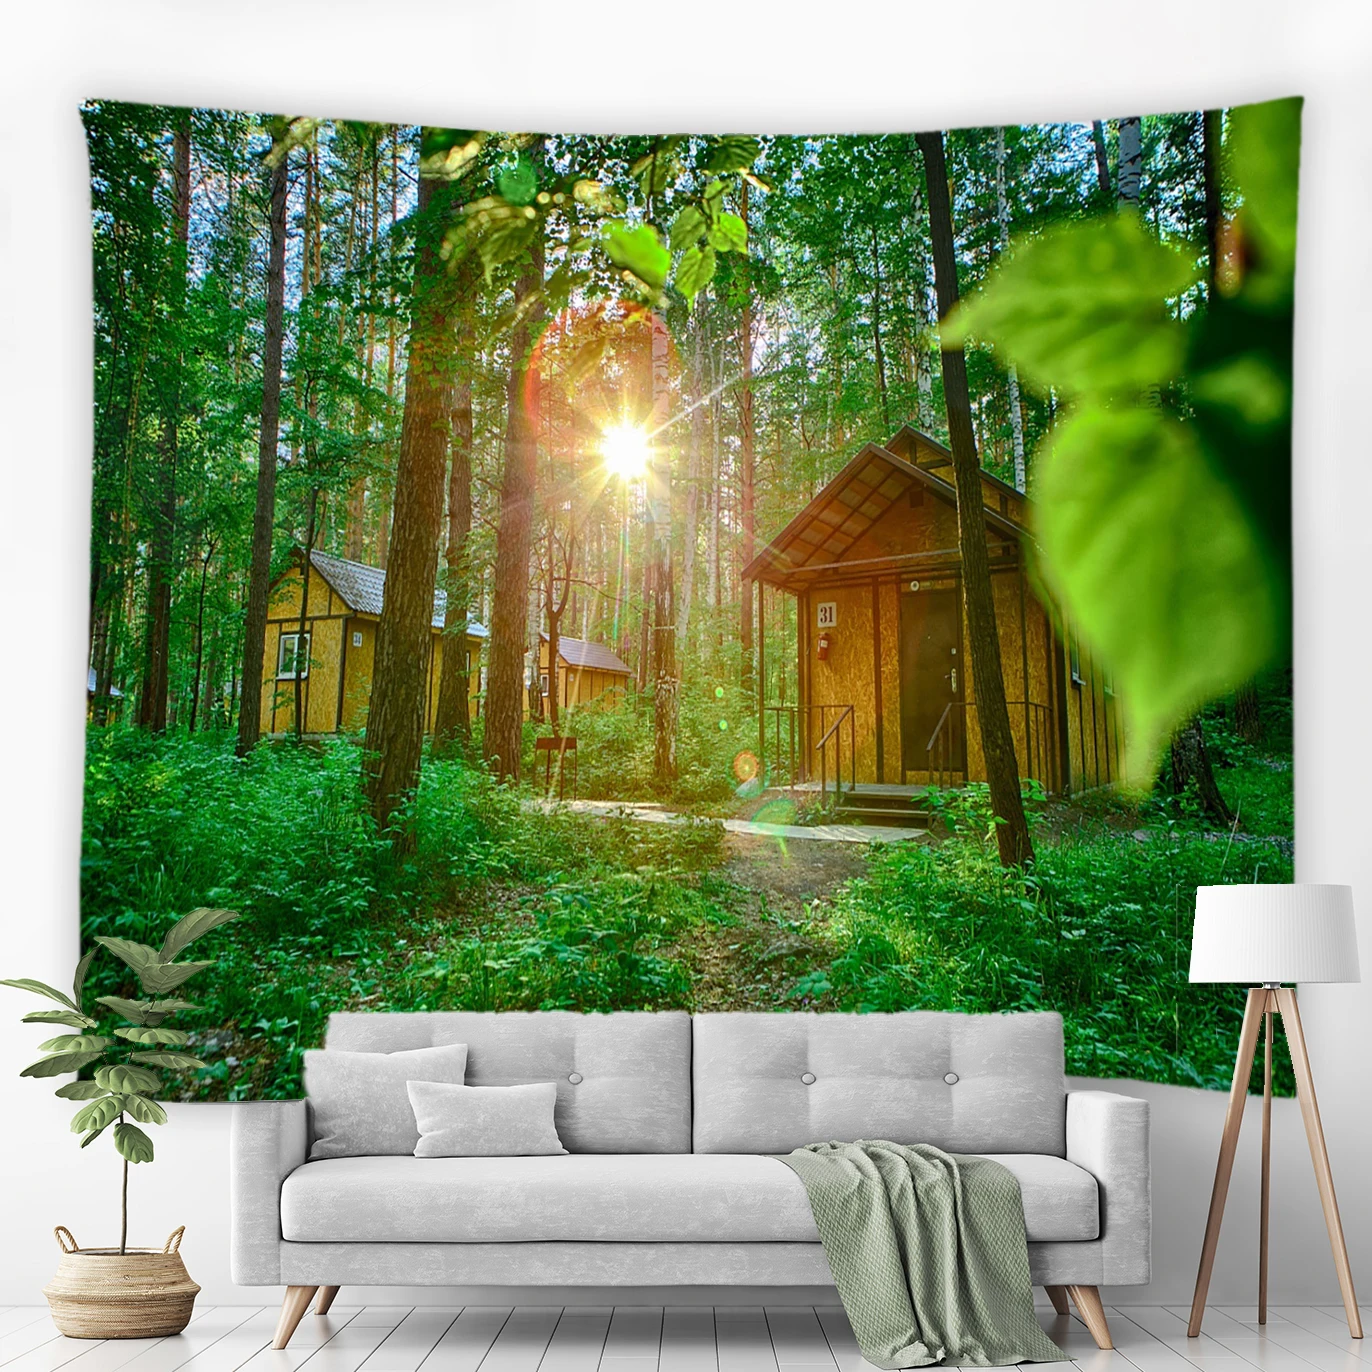 

Psychedelic Forest Landscape Tapestry Fantasy Fairy Tale Mushroom House Hippie Dorm Wall Hanging Rug Bedroom Tapestries Art Wall